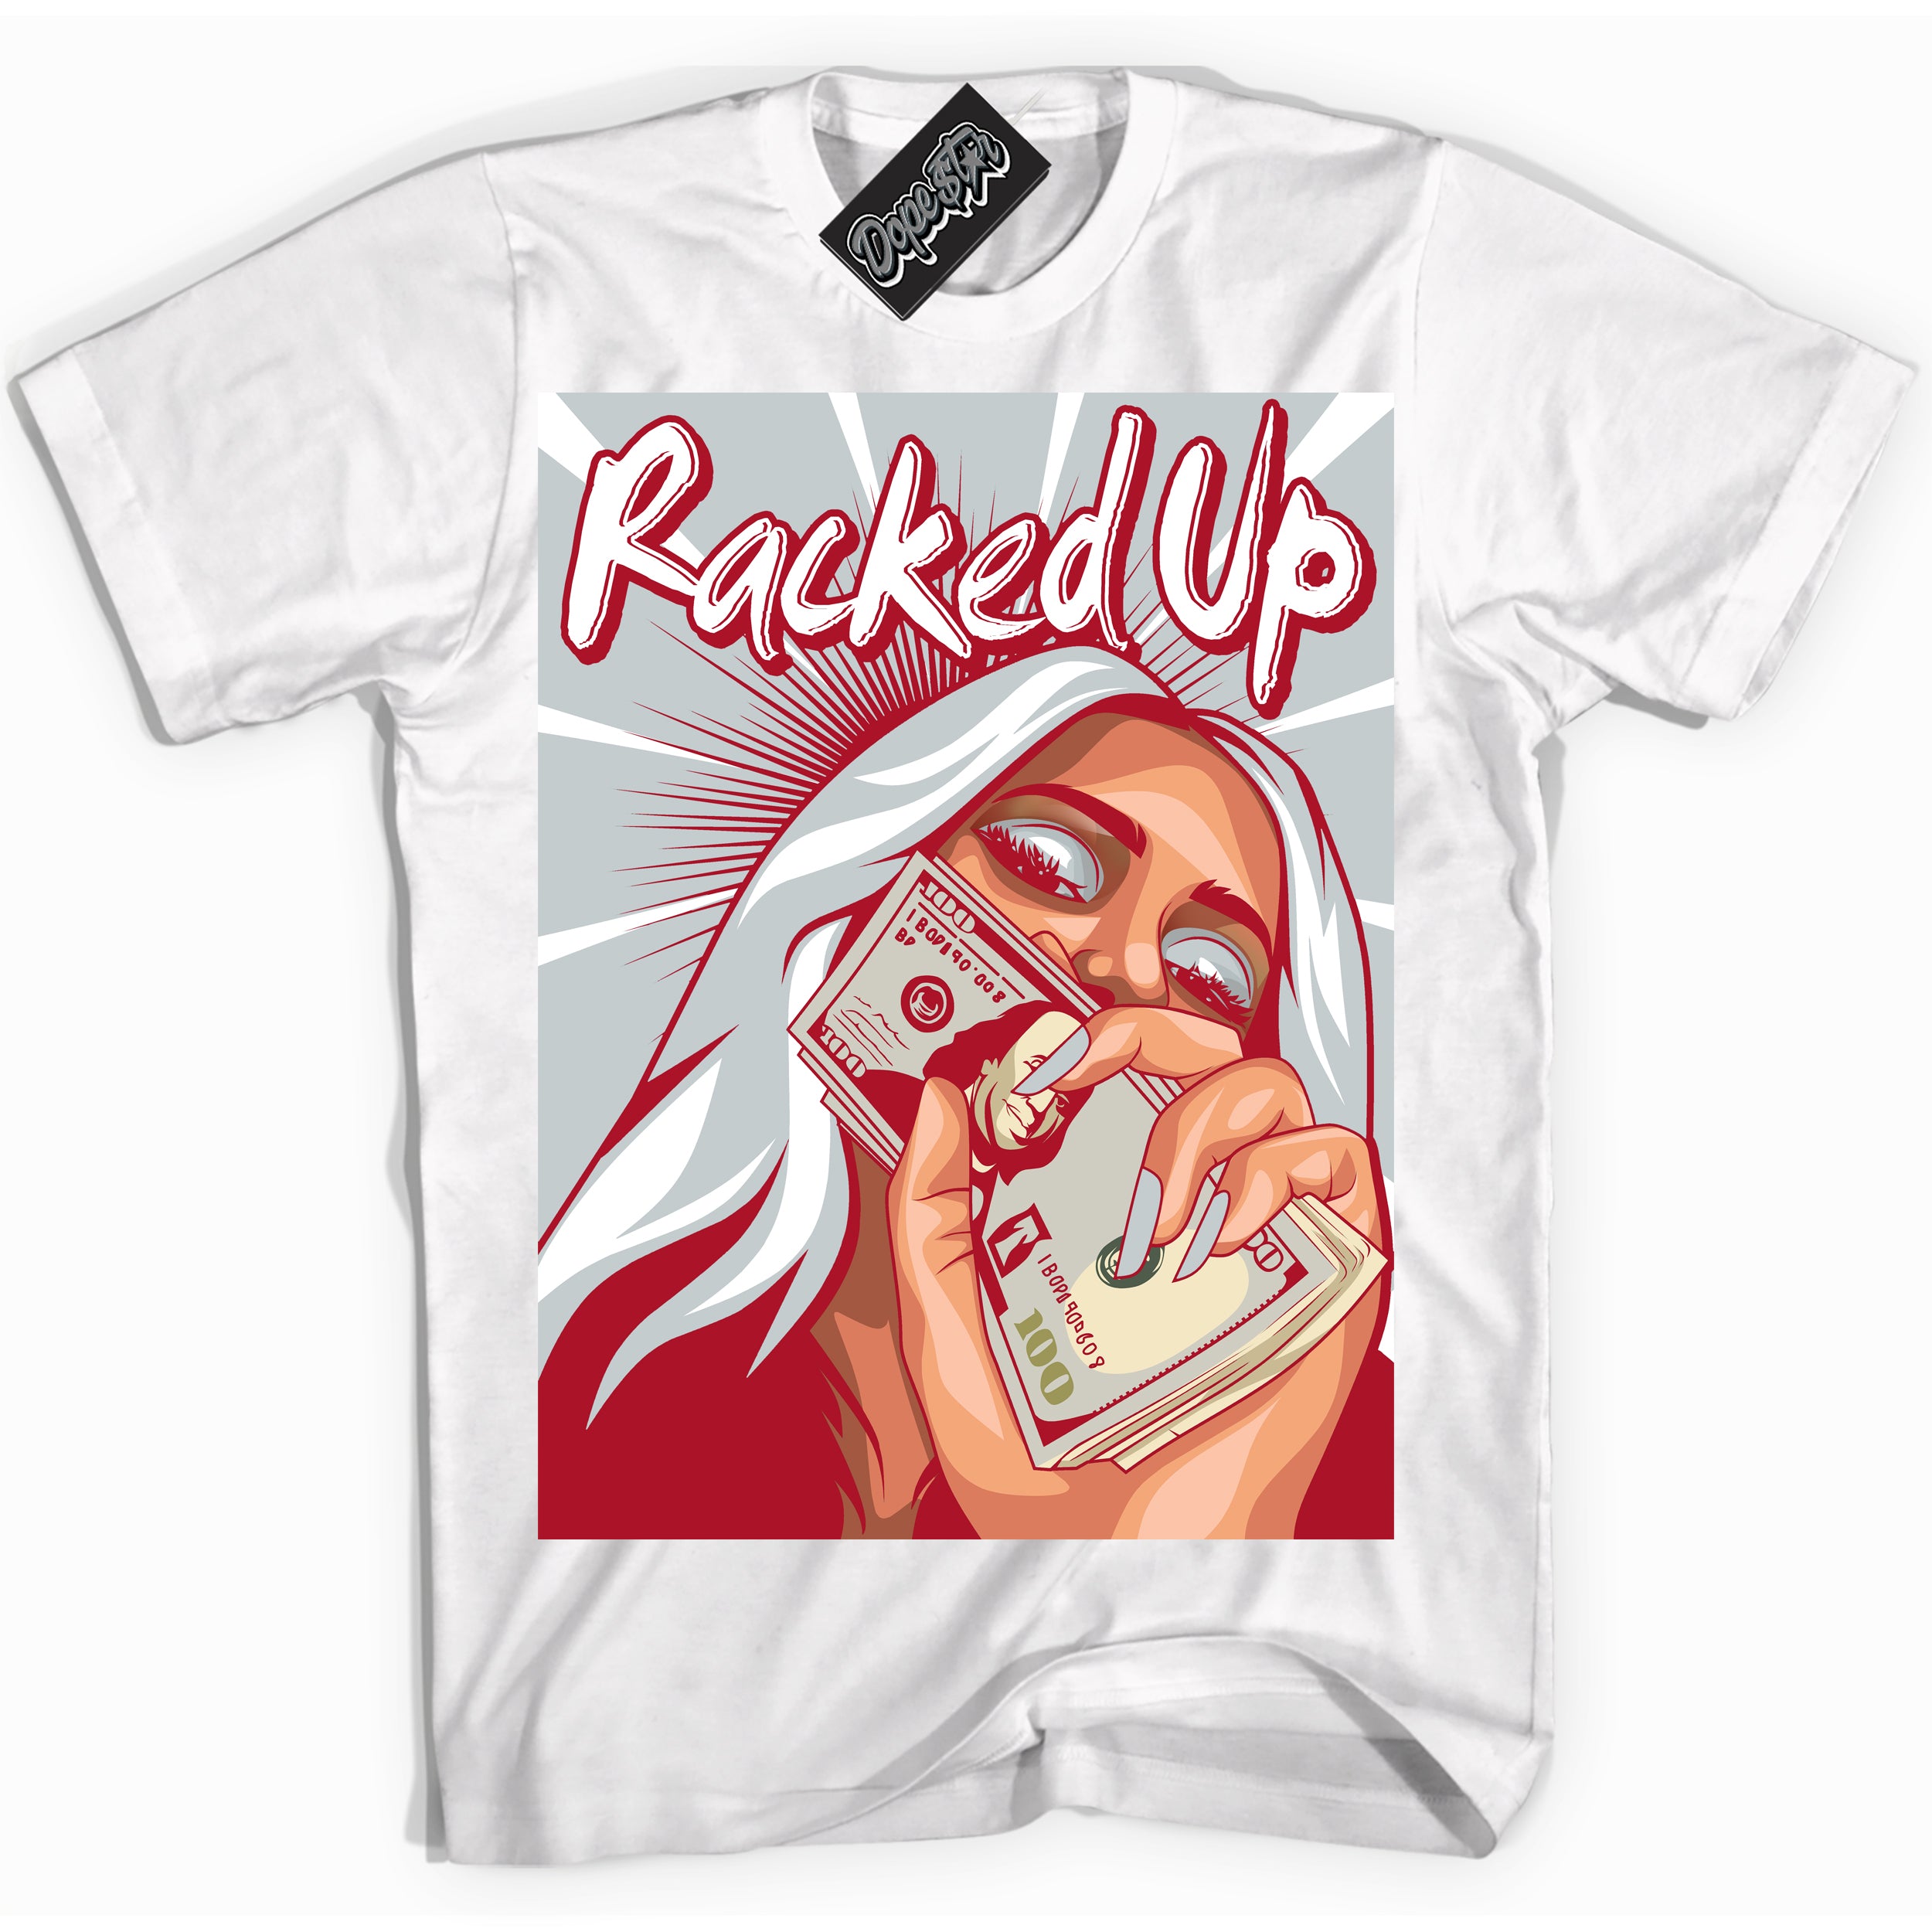 Cool White Shirt with “ Racked Up ” design that perfectly matches Reverse Ultraman Sneakers.